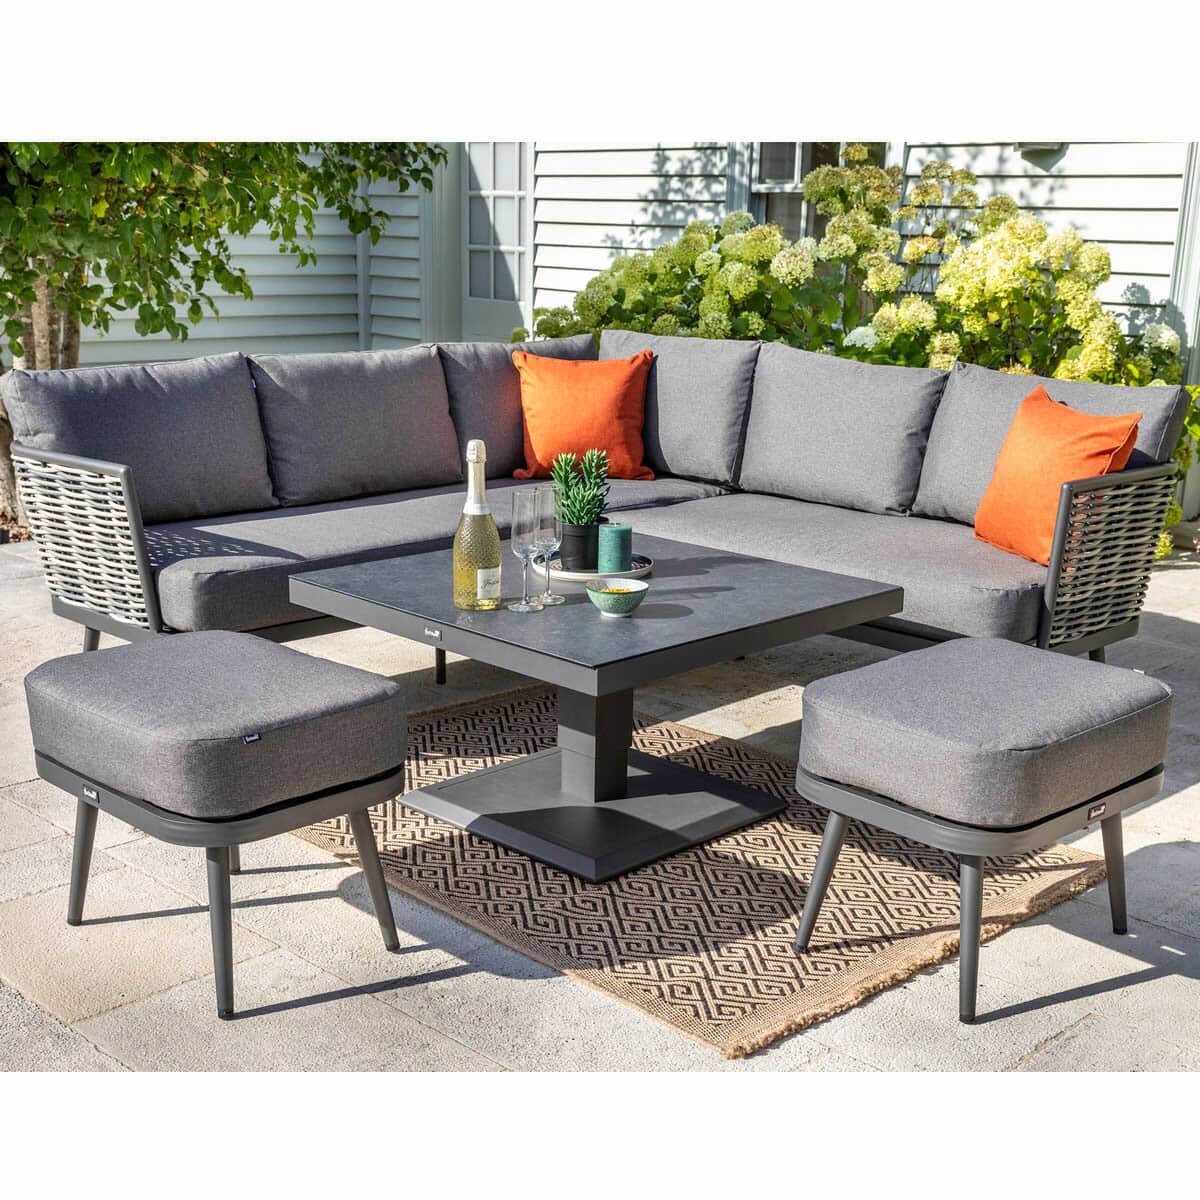 Hartman Aspen Square Casual Dining Set with Height Adjustable Table Xeris/Onyx